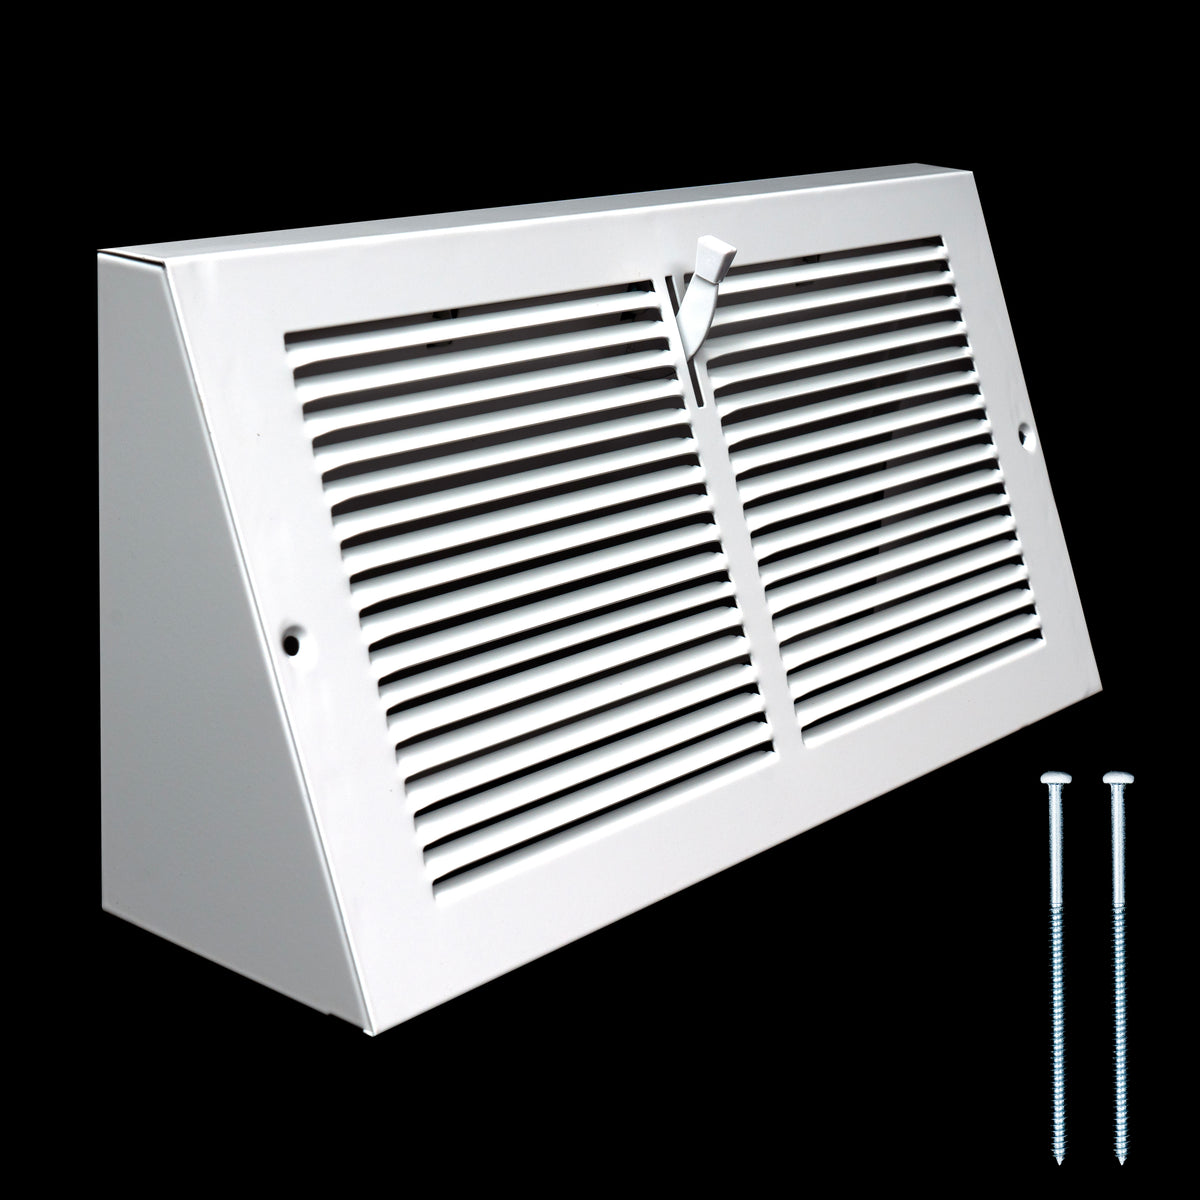 12"W x 6"H [Duct Opening] Steel Triangular Baseboard Return Air Supply Grille with Damper | 3.75" Depth | White | Outer Dimensions: 13-3/4" x 6-5/8"